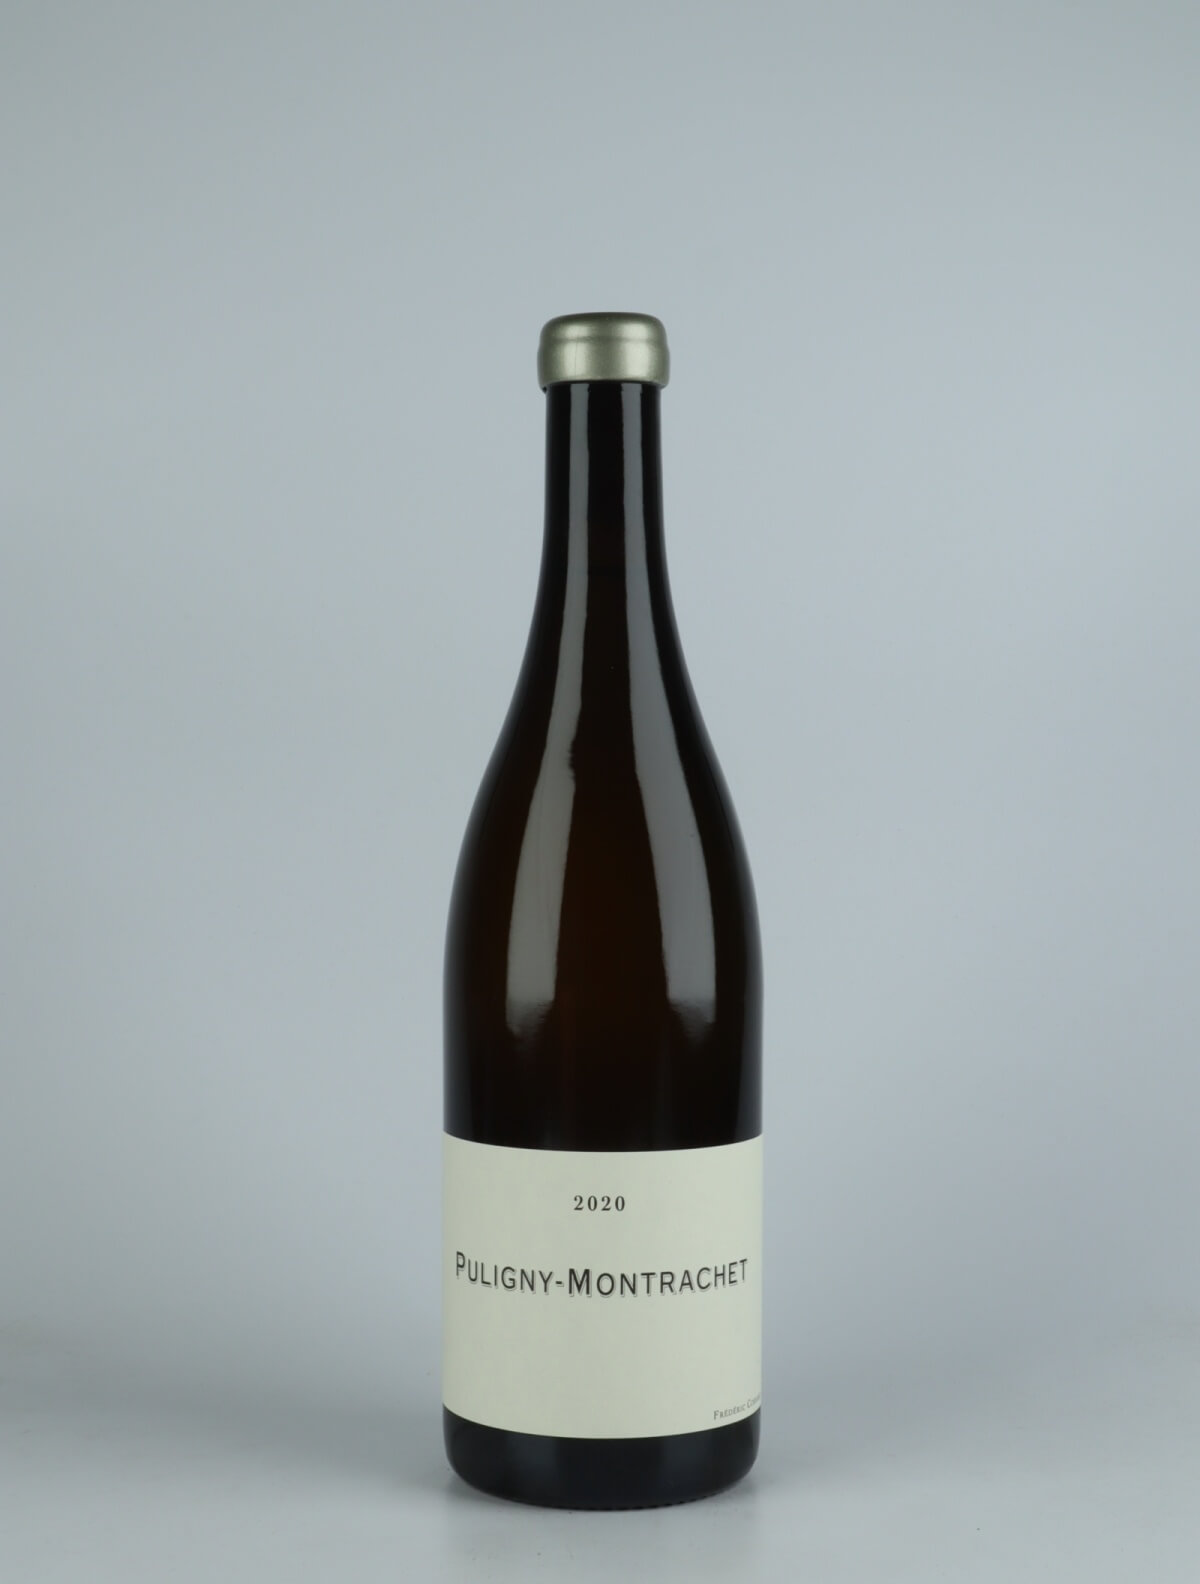 A bottle 2020 Puligny Montrachet White wine from Frédéric Cossard, Burgundy in France